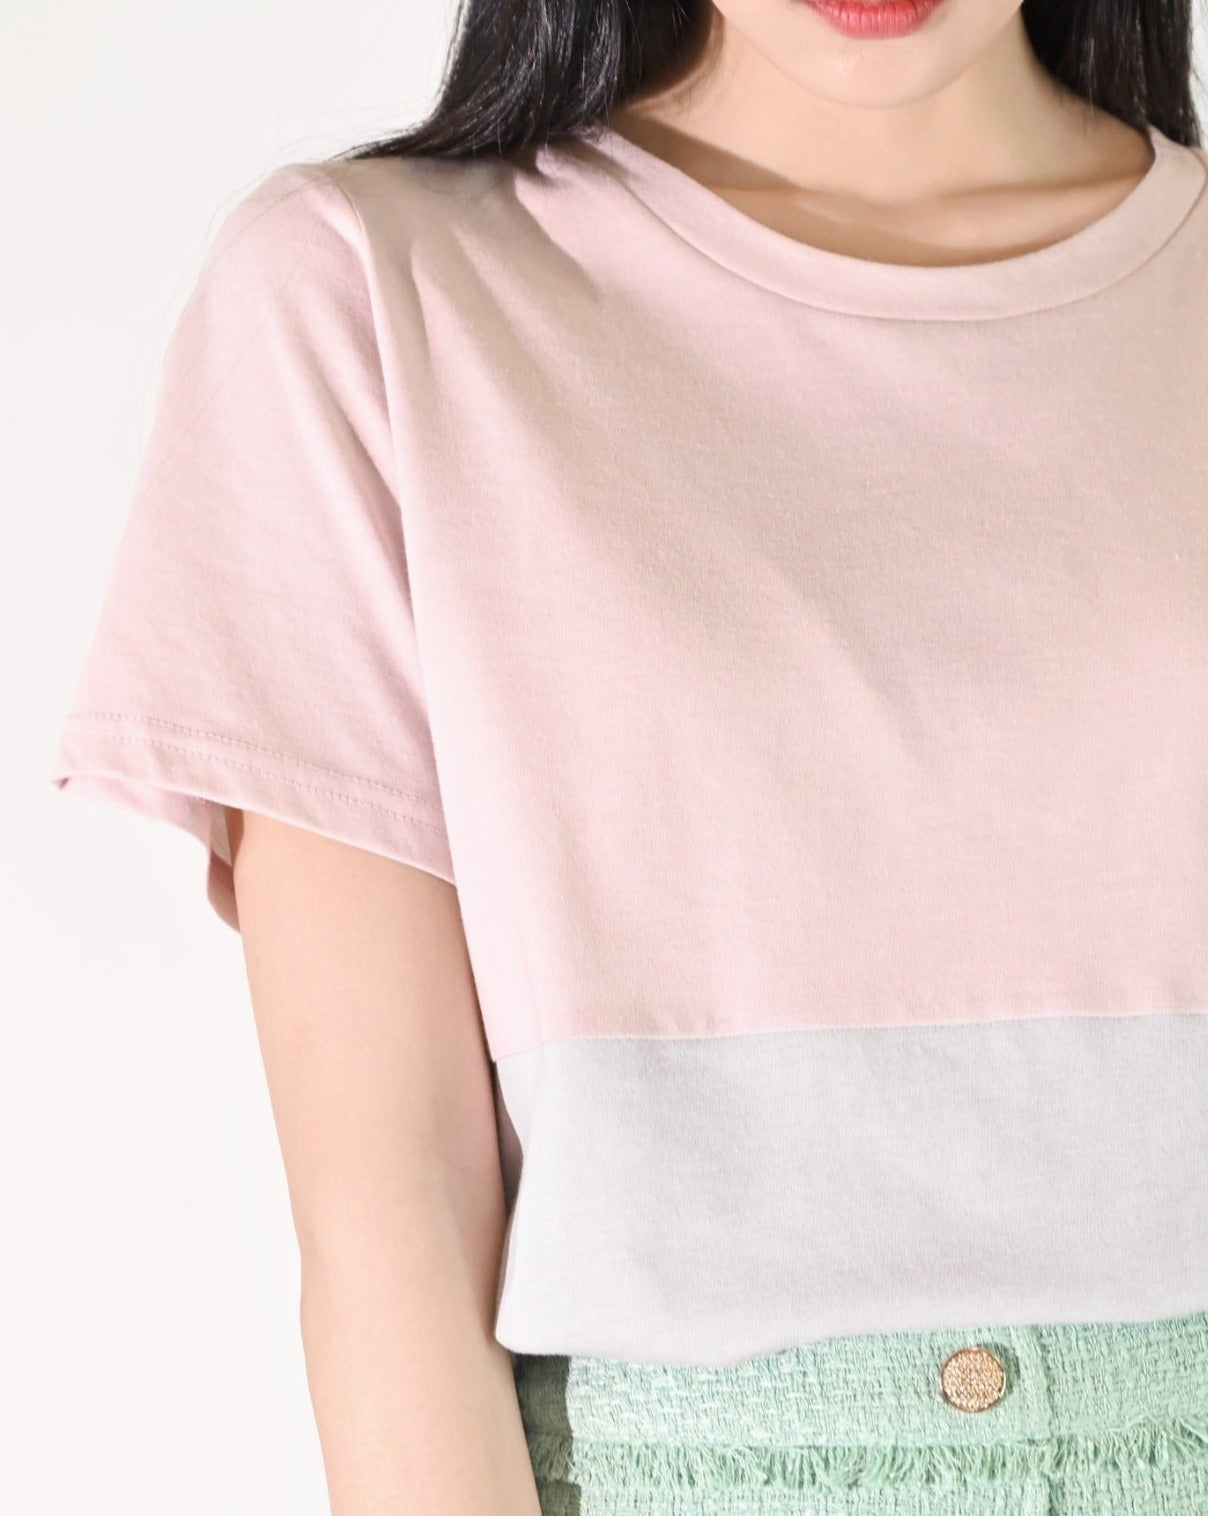 aalis PIP two toned Tee (Light pink grey)